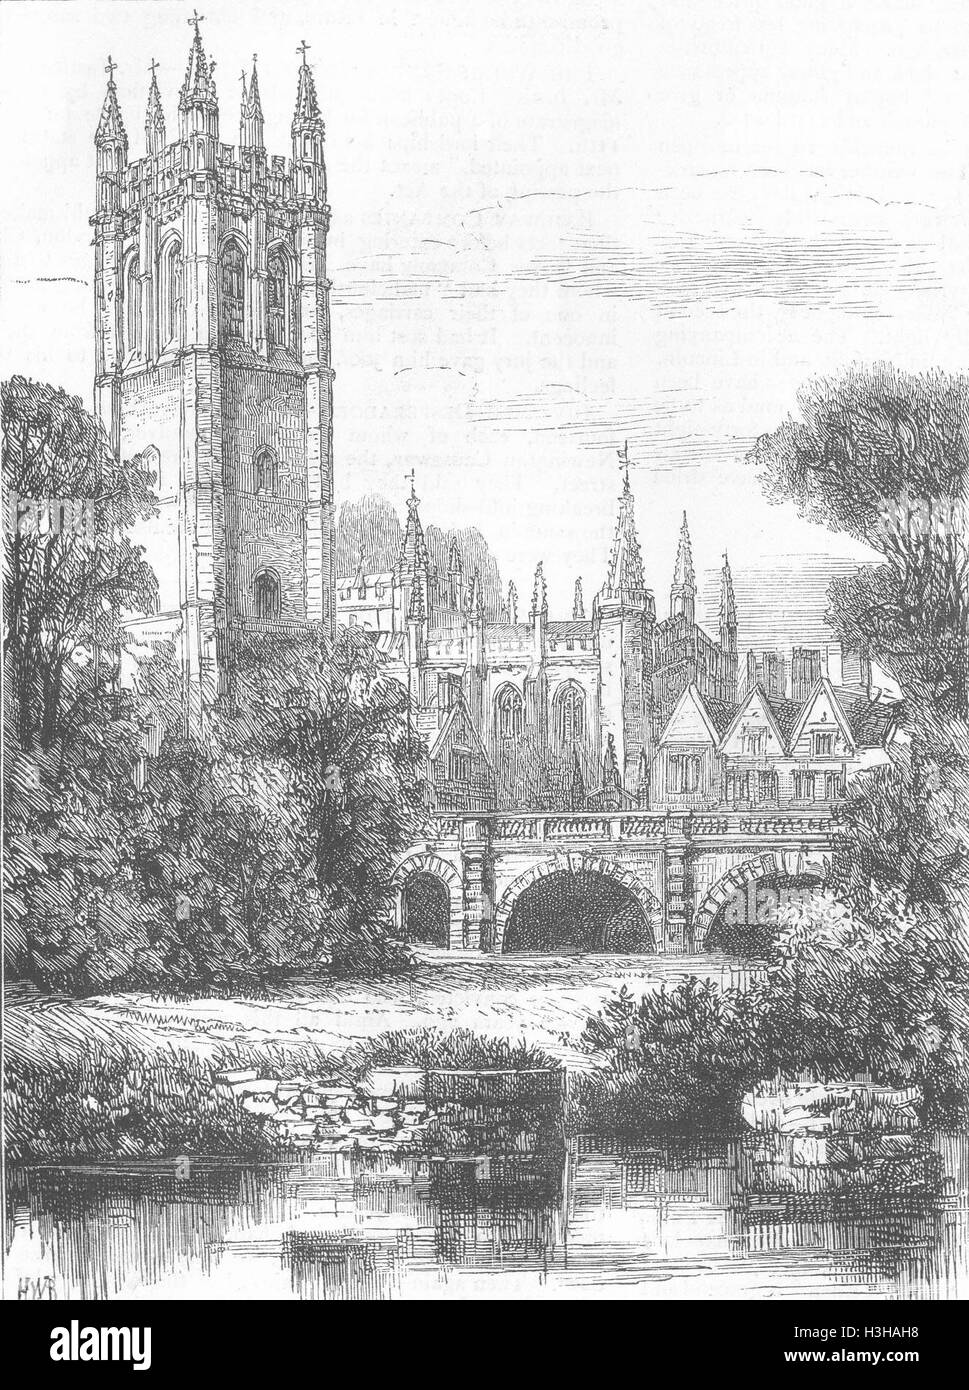 OXON Magdalen Bridge, Oxford, Planned widening 1881. The Graphic Stock Photo